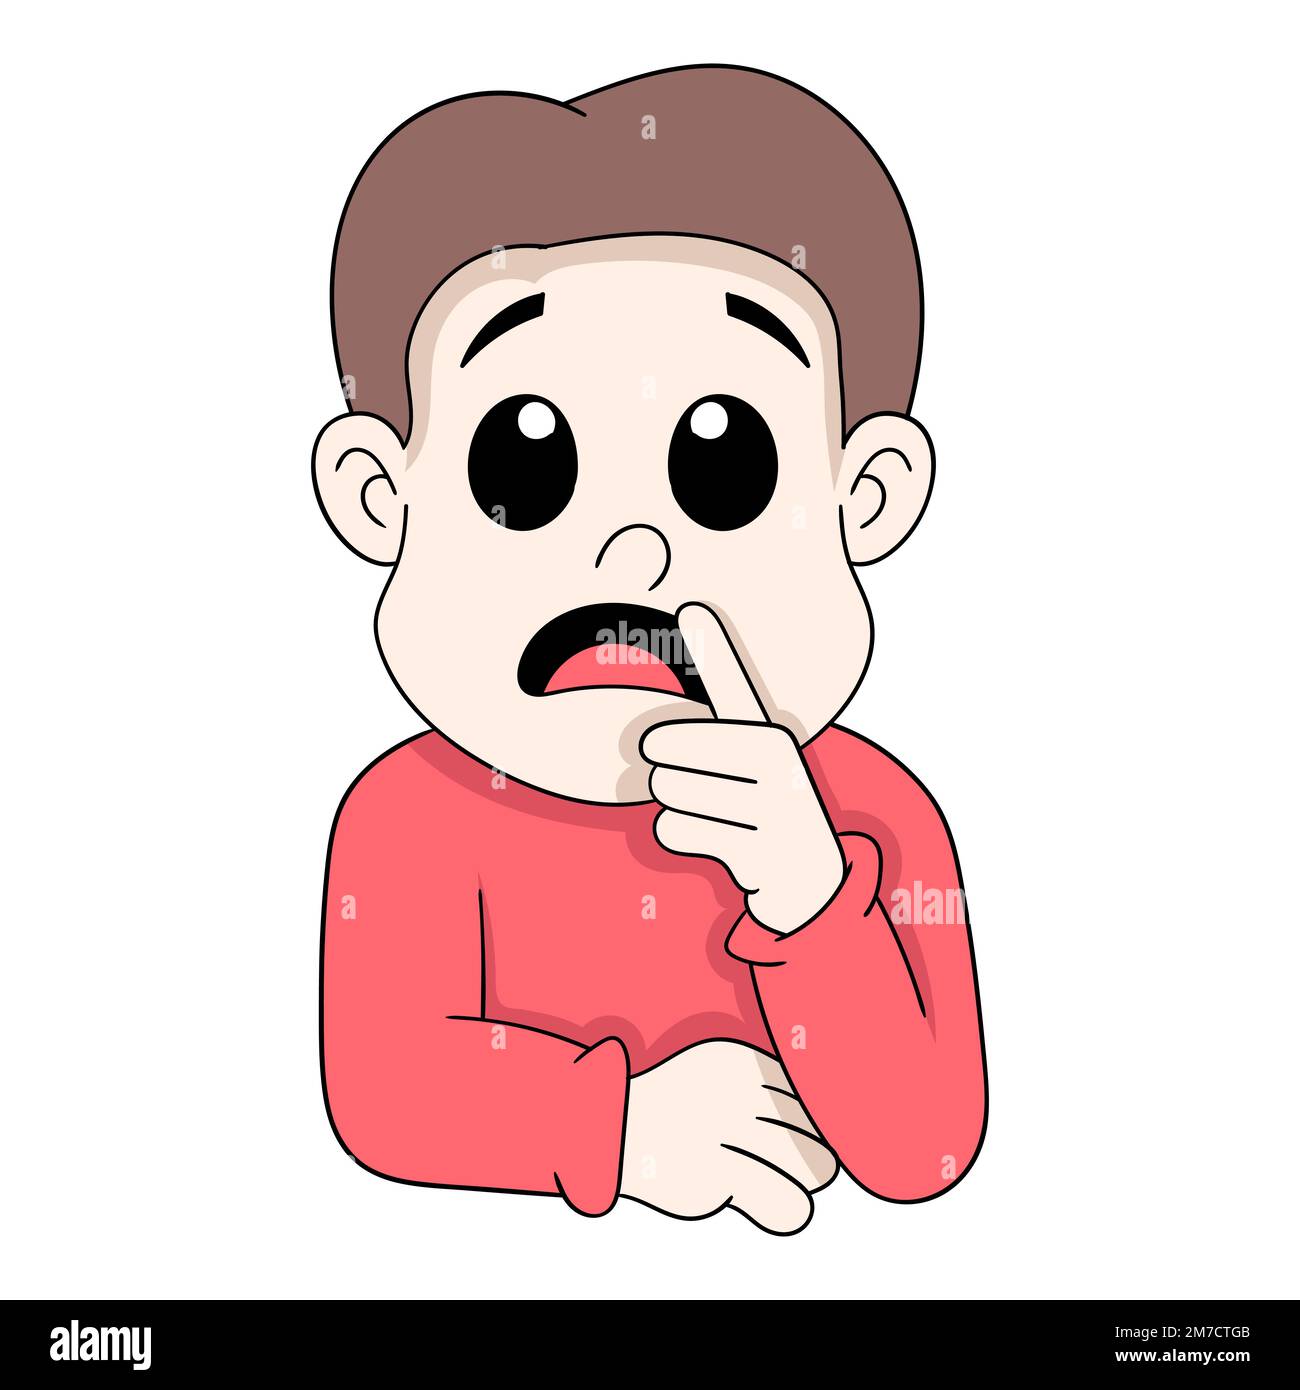 Confused Face Stock Vector Illustration and Royalty Free Confused Face  Clipart